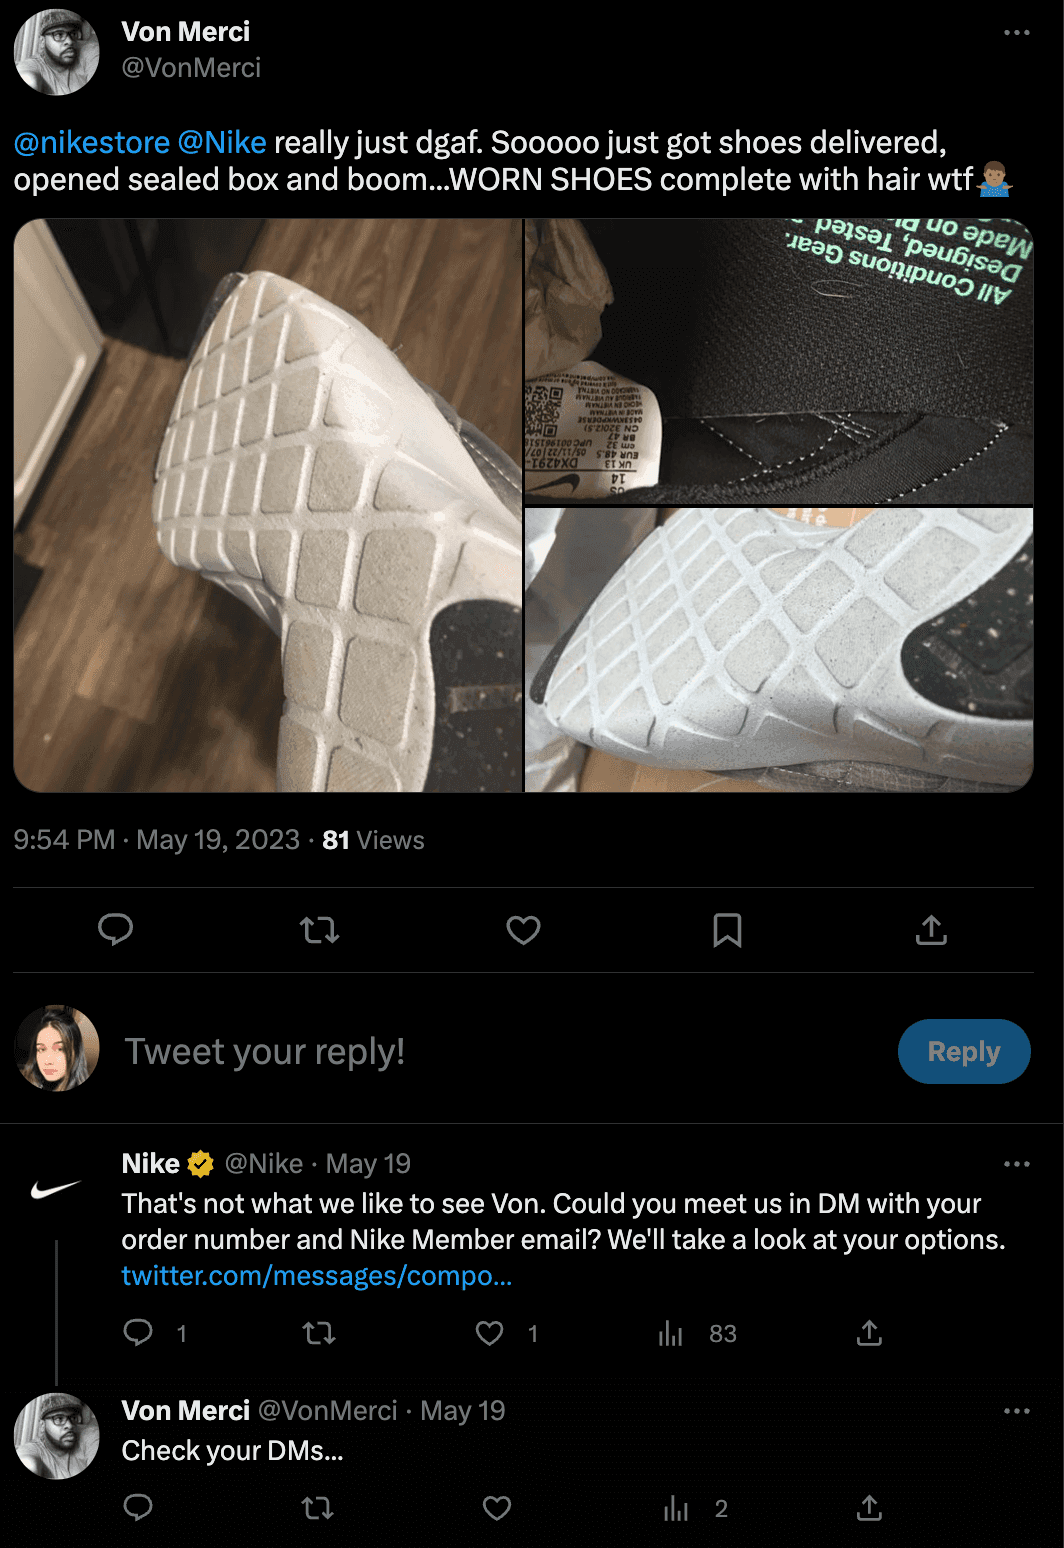 Screenshot of tweet from angry customer about getting shoes in poor condition - Nike responds by asking them to message them